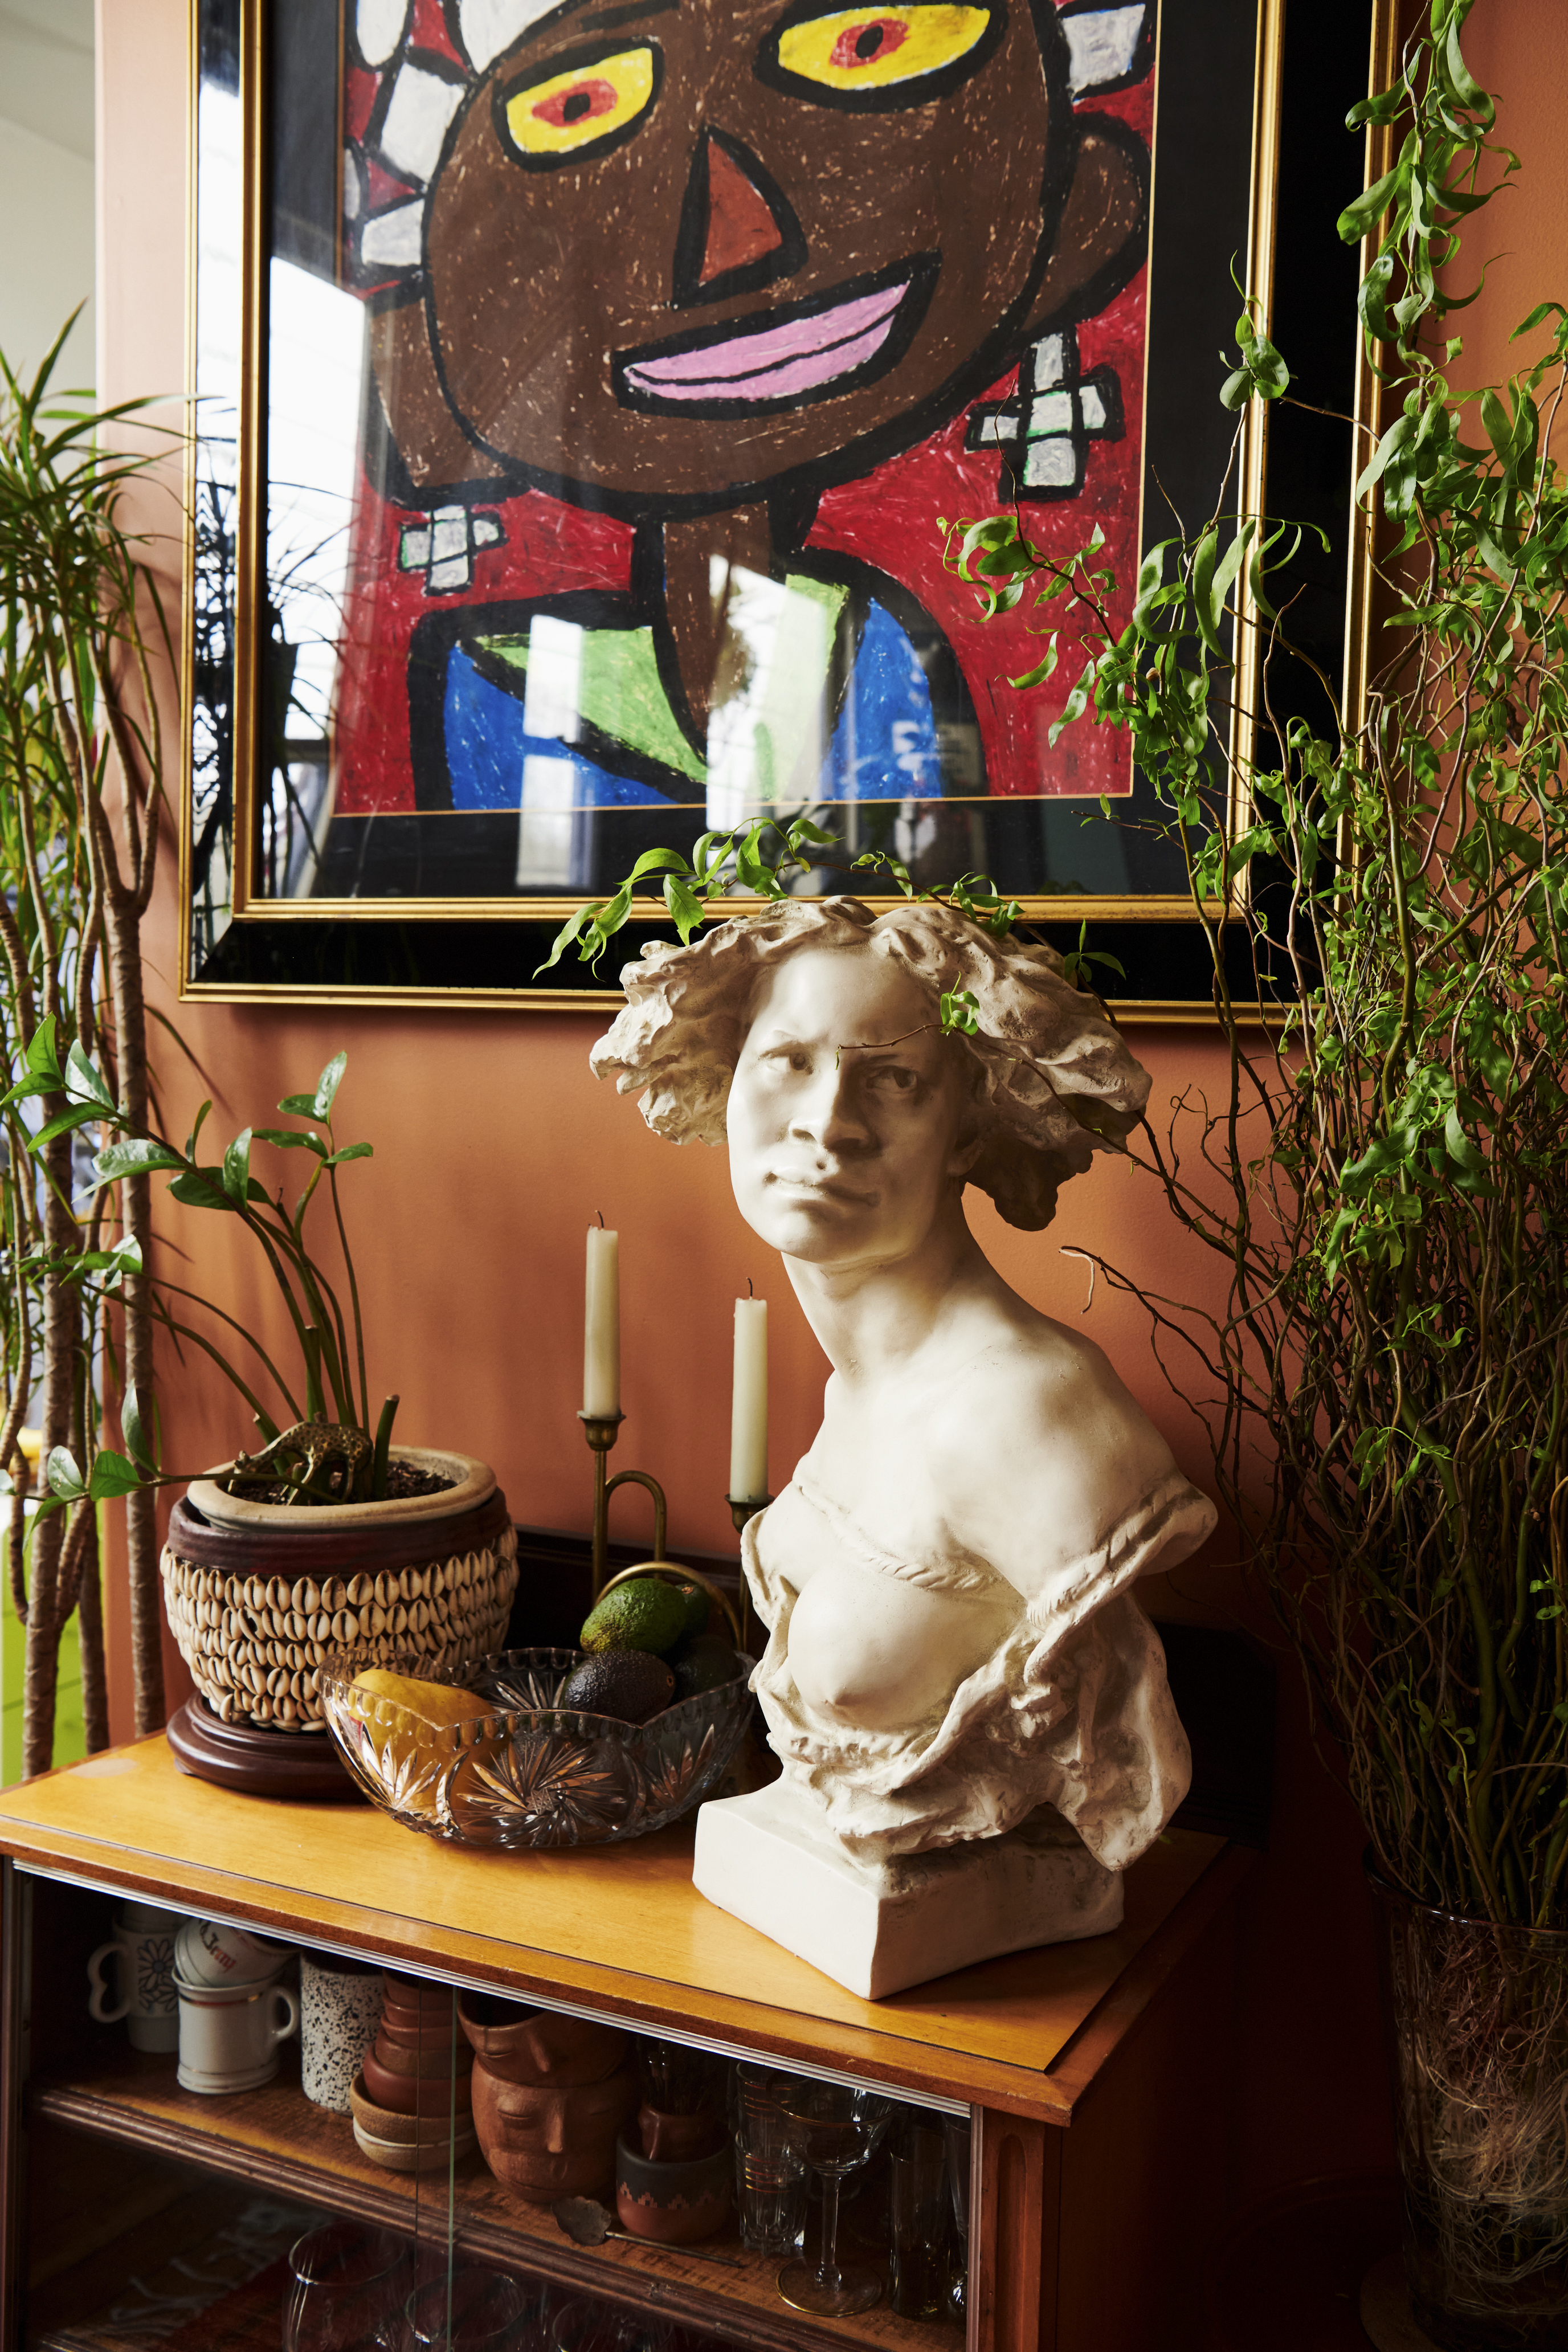 A white marble bust sits on a wooden cabinet topped with plants, fruit, and candles, beneath a vibrant framed painting of a smiling face.